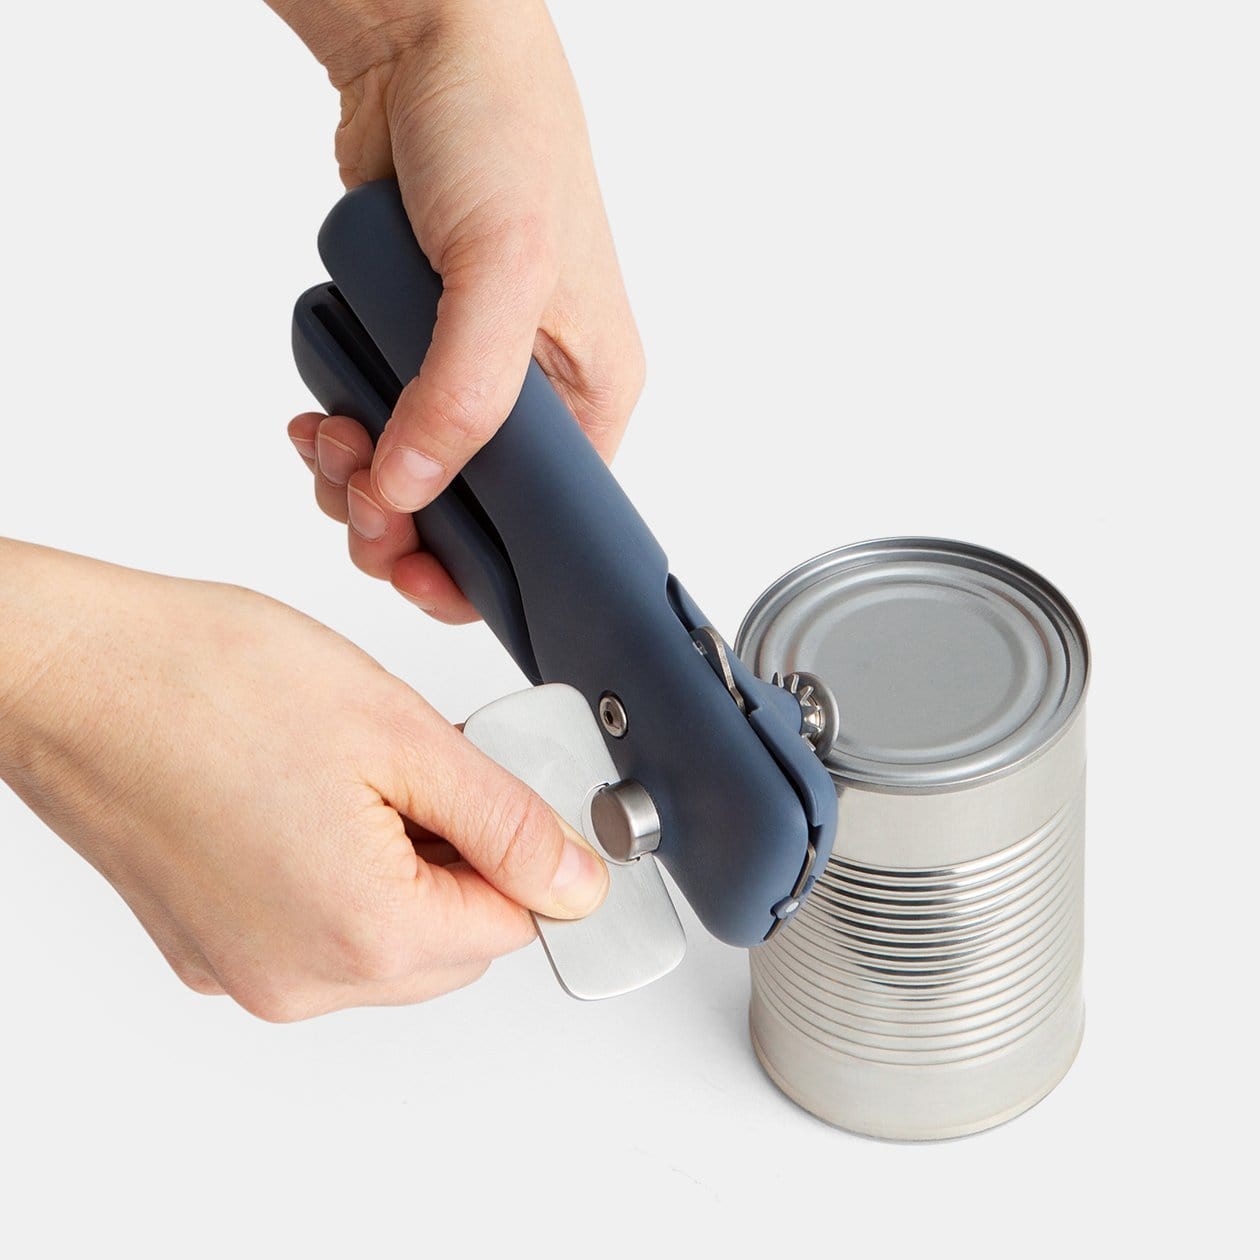 chefstyle Magnetic Can Opener